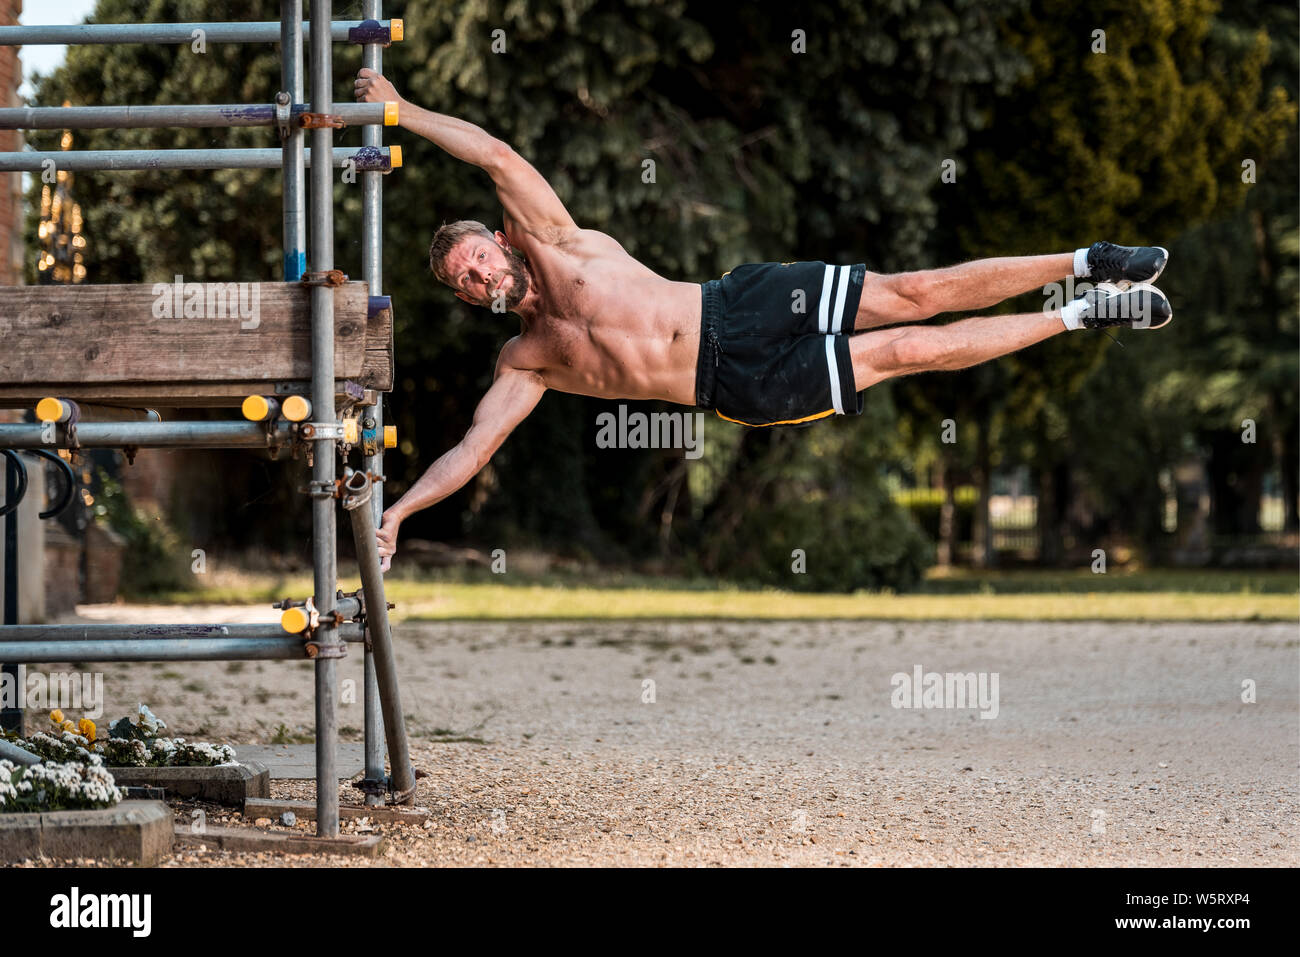 Fit Muscular man performing calisthenics fitness workout on outdoor ...